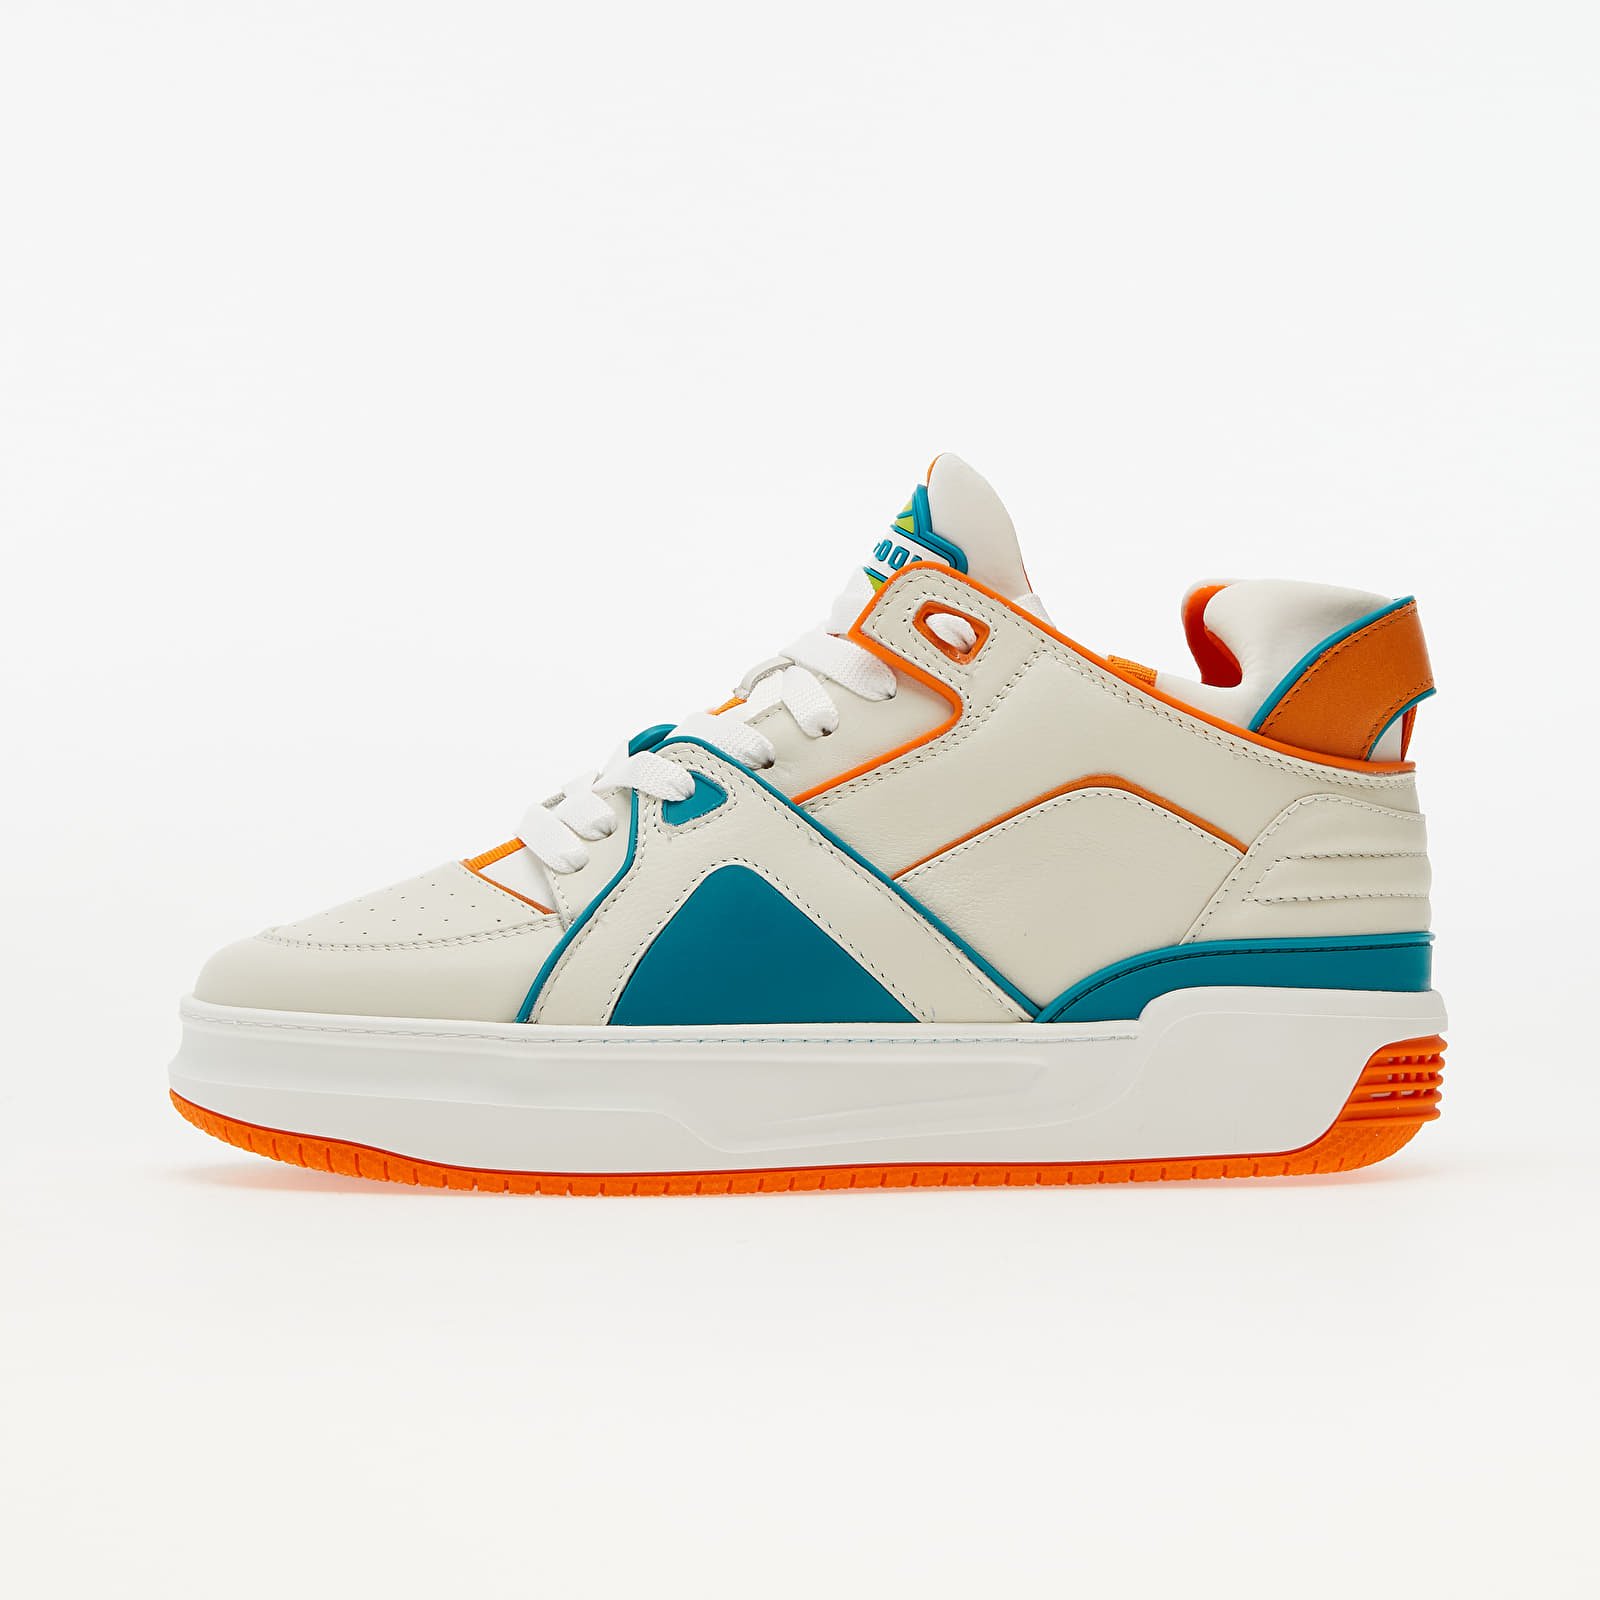 Men's shoes Just Don Courtside Tennis MID JD2 Off-white/ Orange/ Turquoise